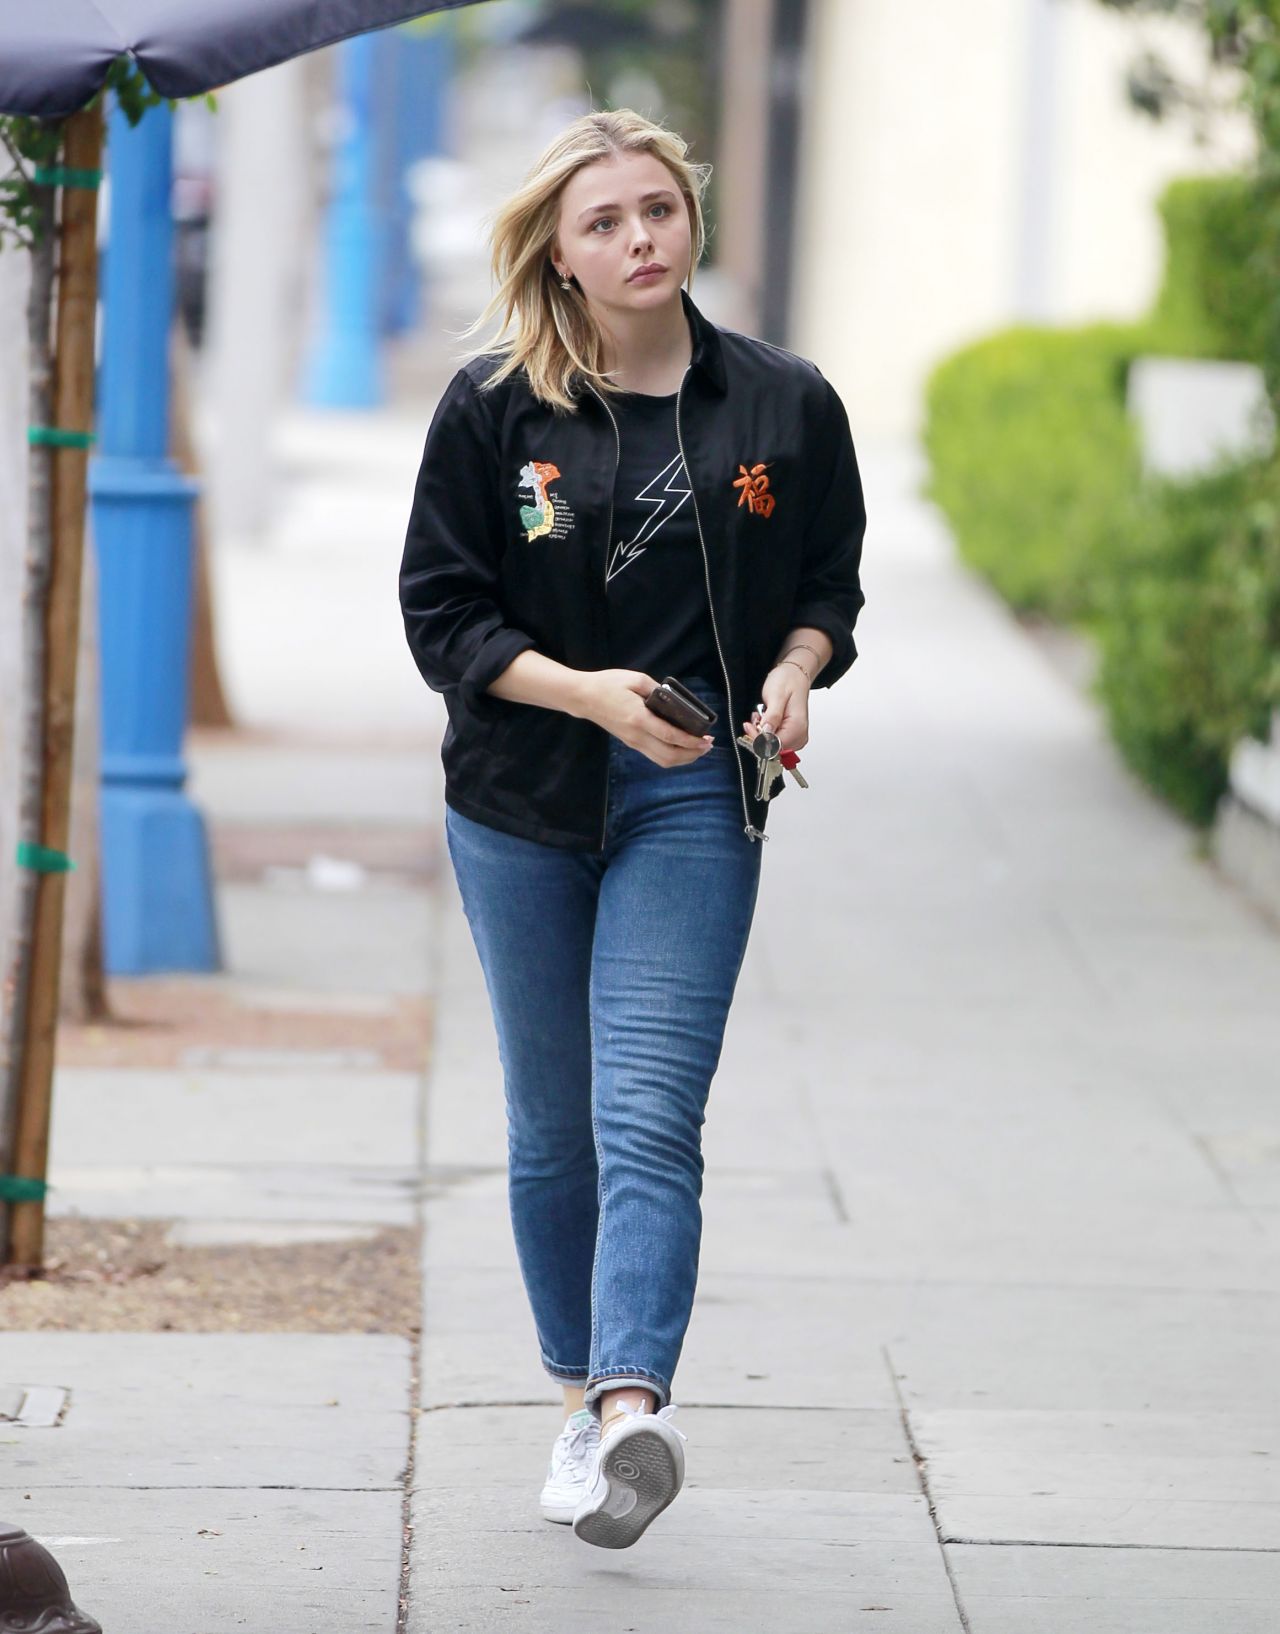 Chloë Grace Moretz on Her Casual-But-Cool Style Essentials, My Look